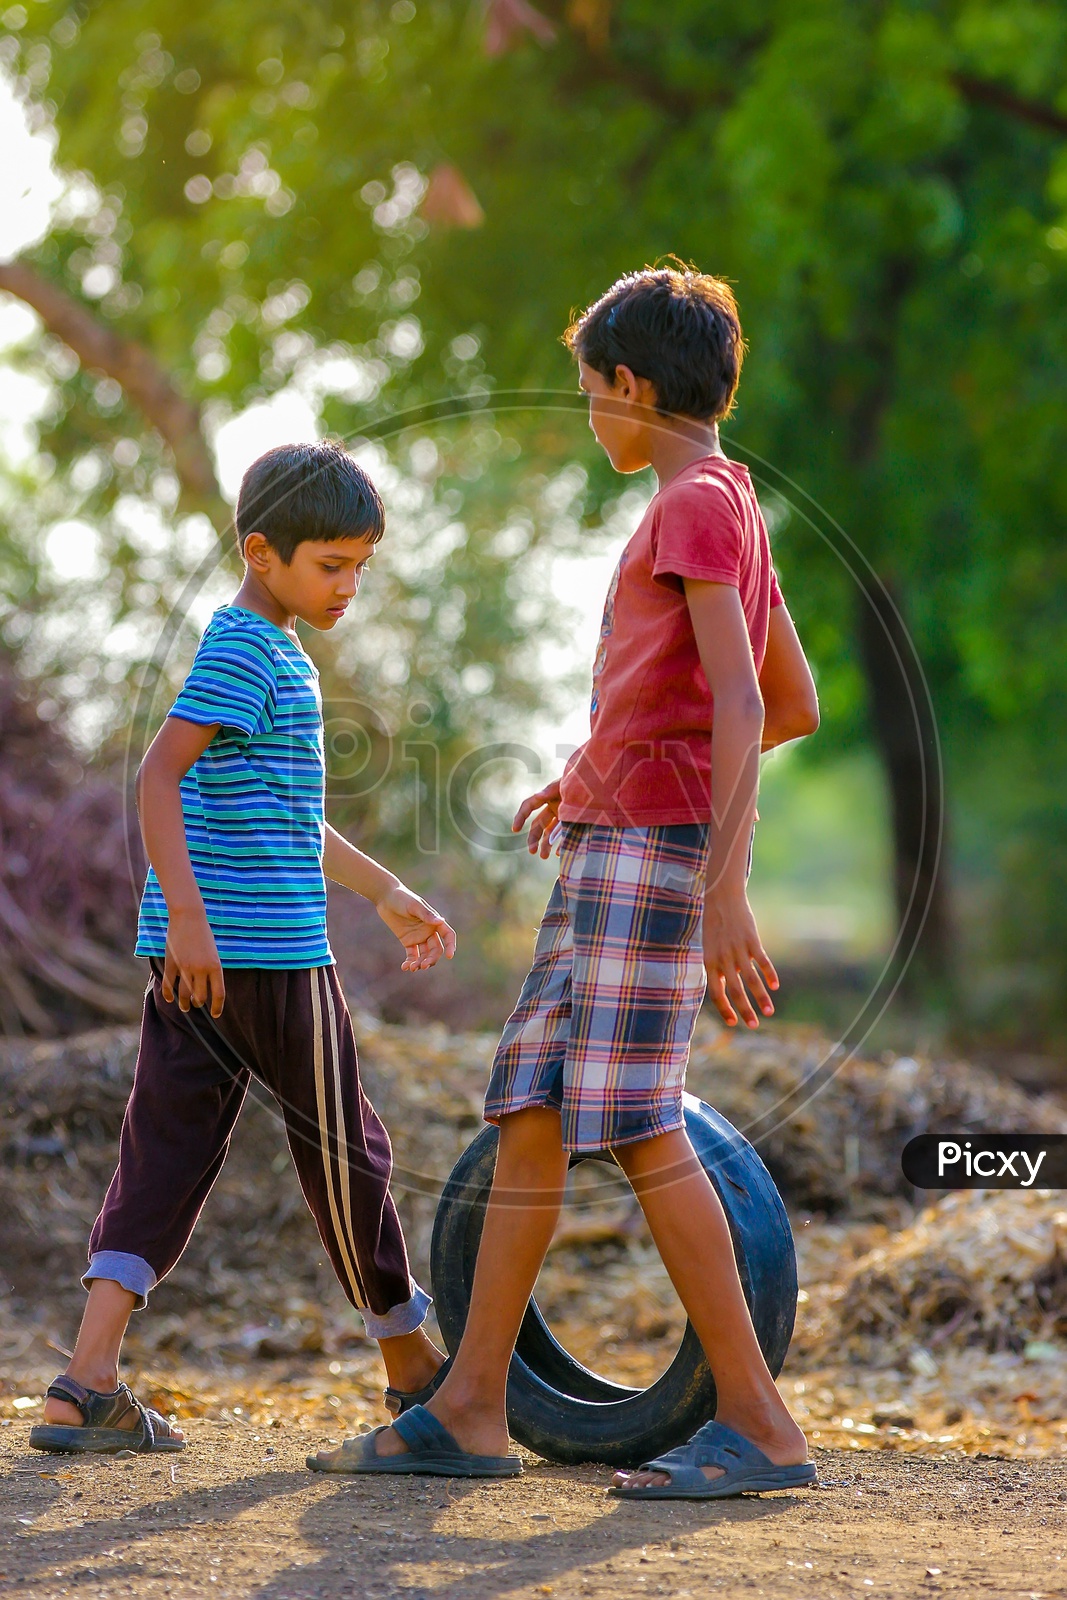 Indian Rural Village Kids Playing Outdoor in Green Environment